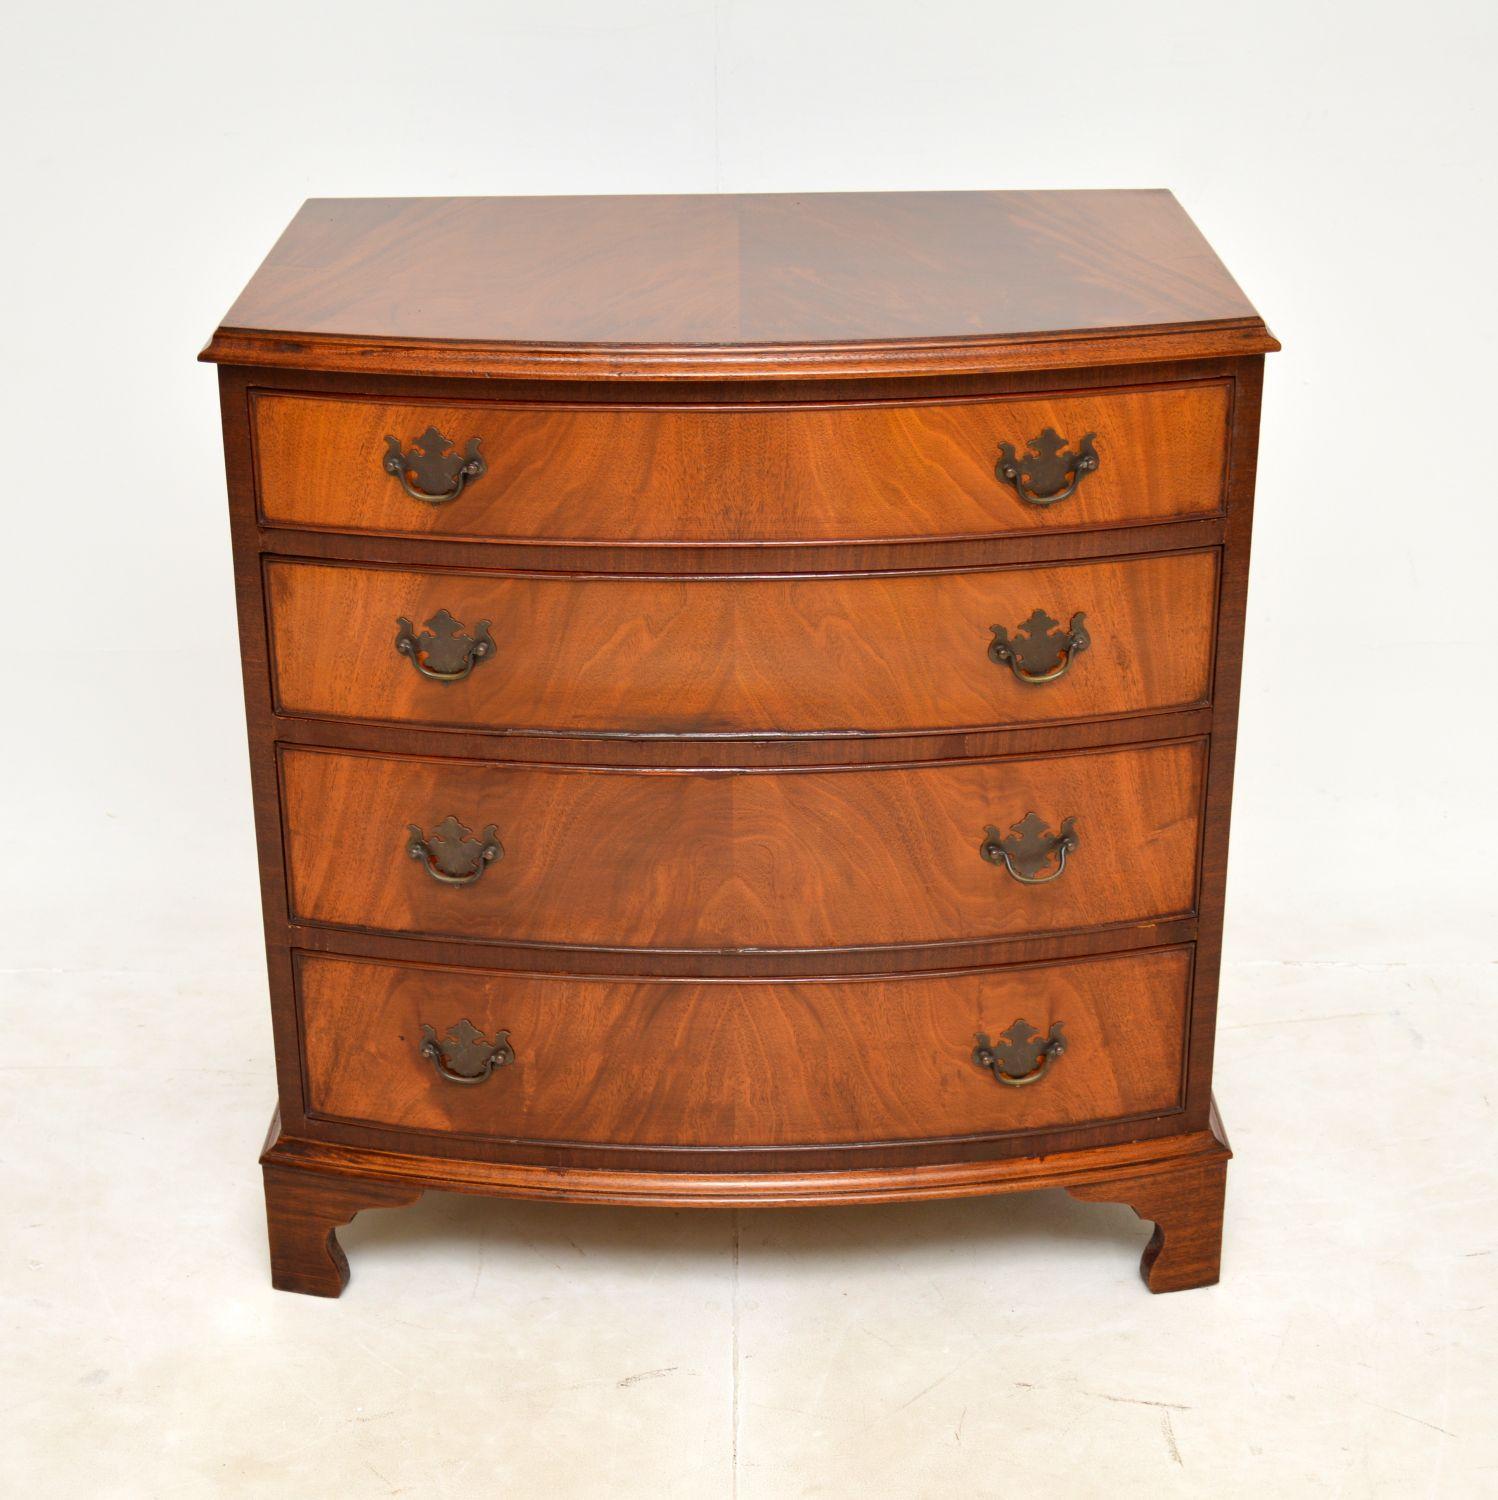 A lovely antique bow fronted chest of drawers in the Georgian style. This was made in England, it dates from around the 1950s.

This is very well made and is a very useful size. There are beautiful flamed grain patterns, this has original brass